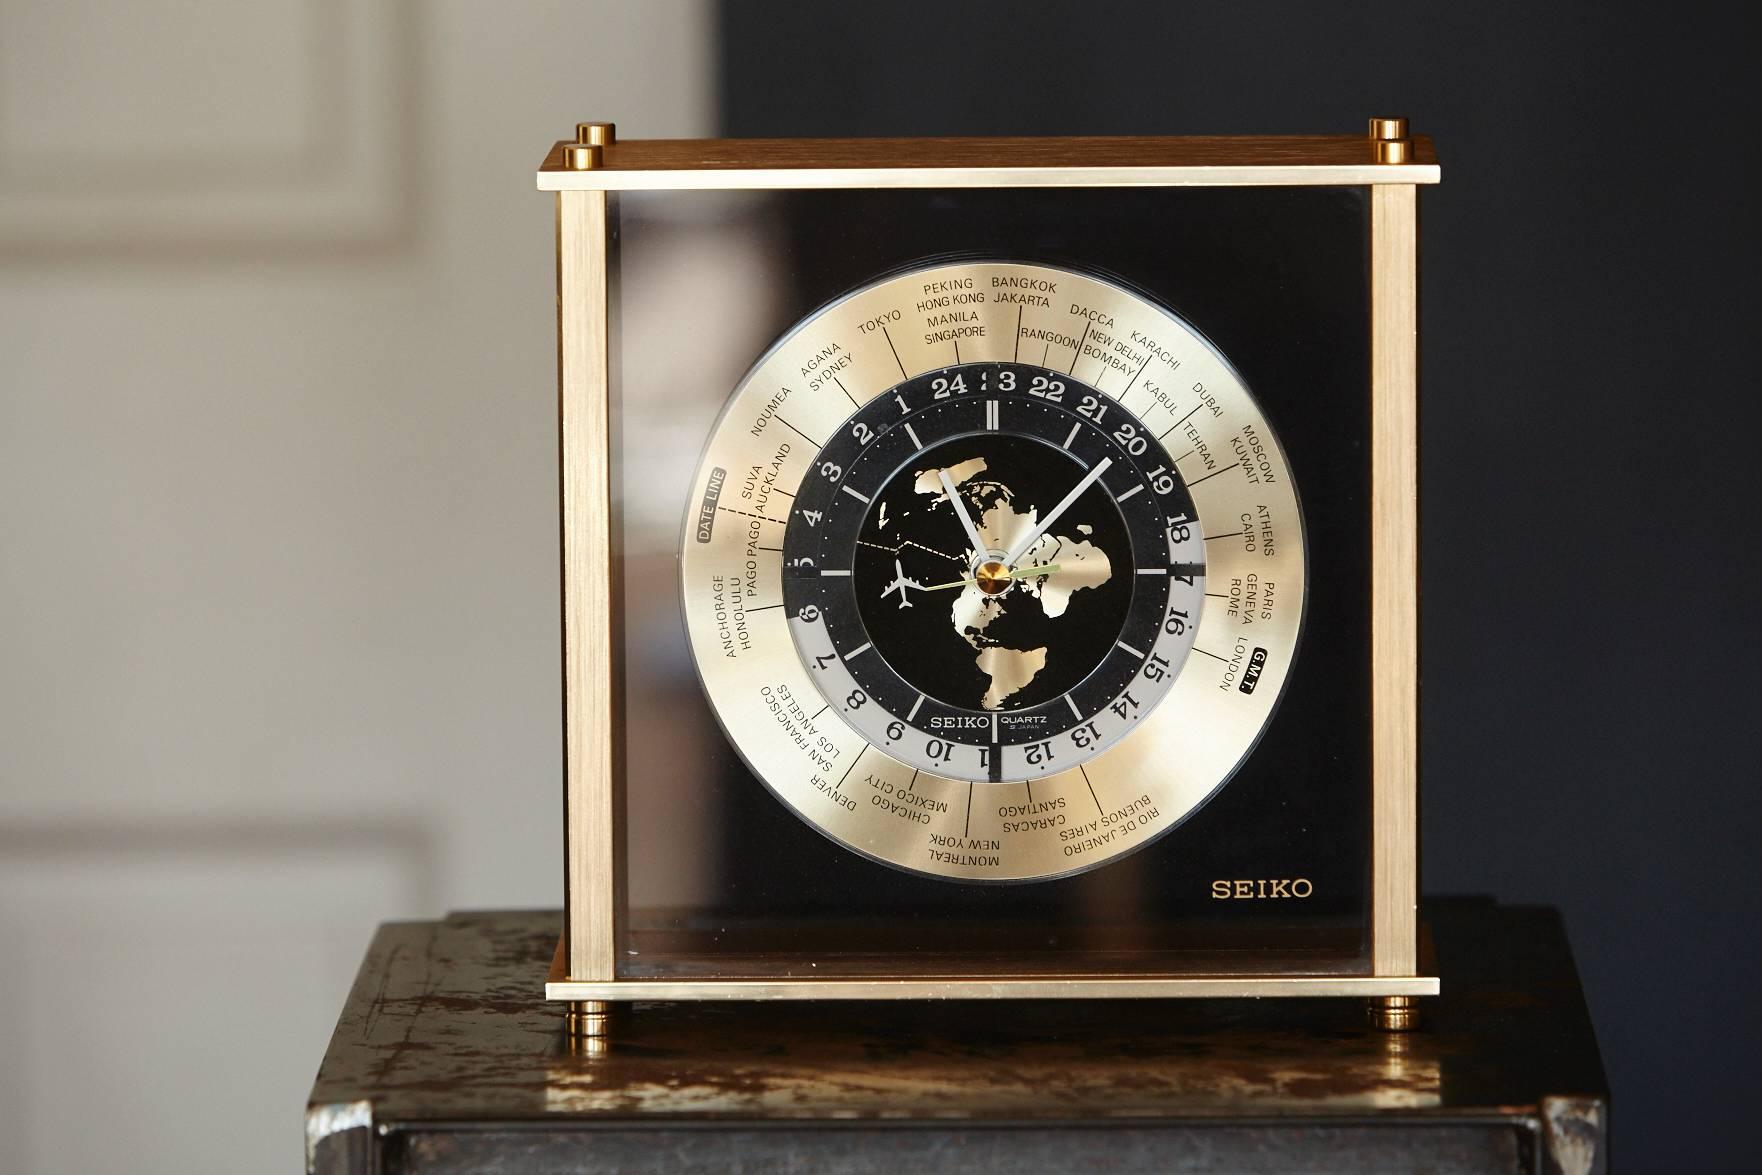 Vintage automatic world time desk clock in a brushed bras case, with crystal glass in front and smoked grey acrylic panel in the back. Automatic world time dial with 25 time zones. Beautiful detail is the seconds dial in form of a jet airliner